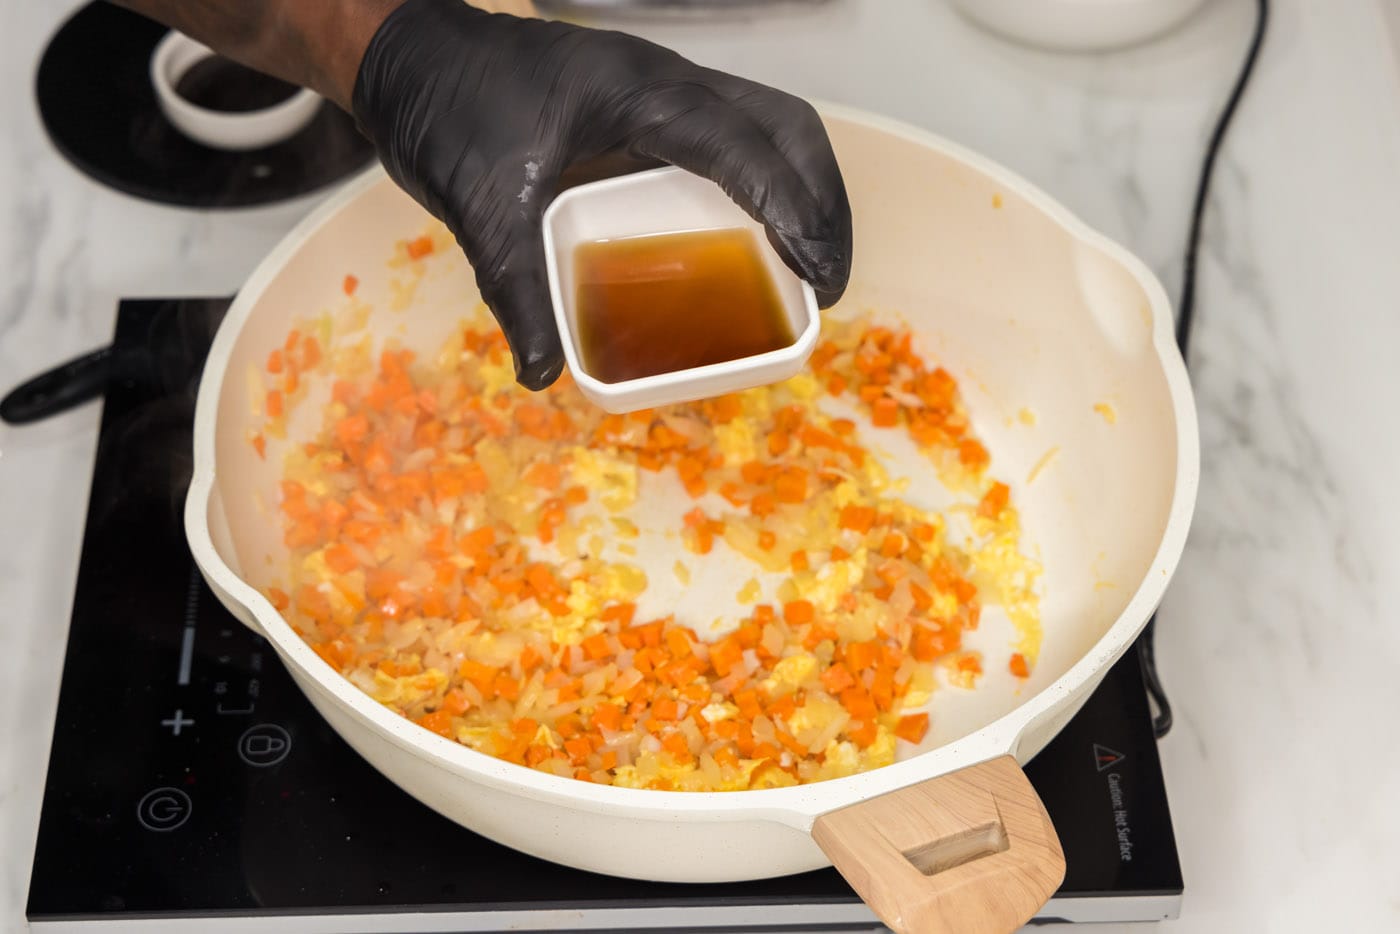 adding fish sauce to scrambled eggs and veggies in a skillet